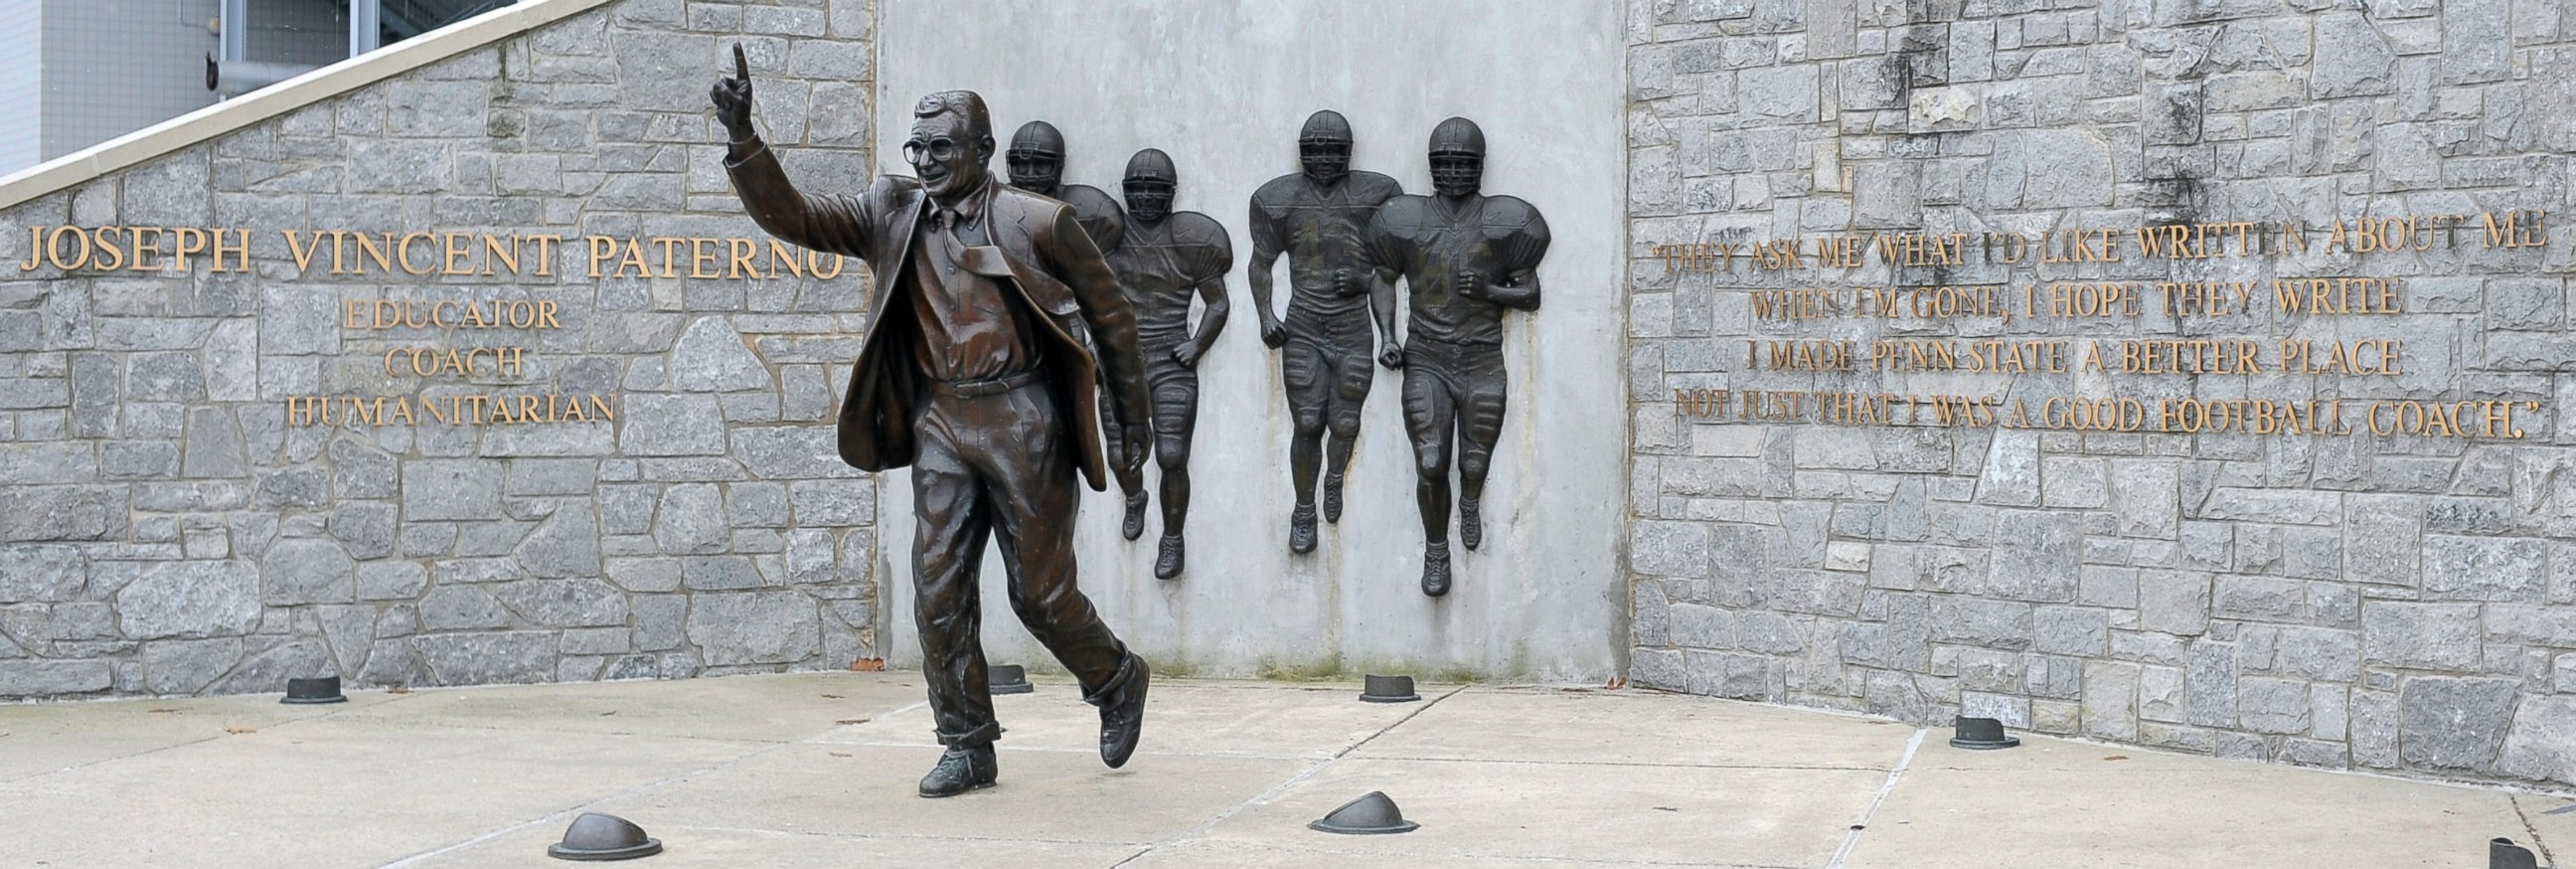 PHOTO: A statue dedicated to former Penn State football coach Joe Paterno outside the Penn State football stadium in State College, Pennsylvania, Jan. 12, 2012. 